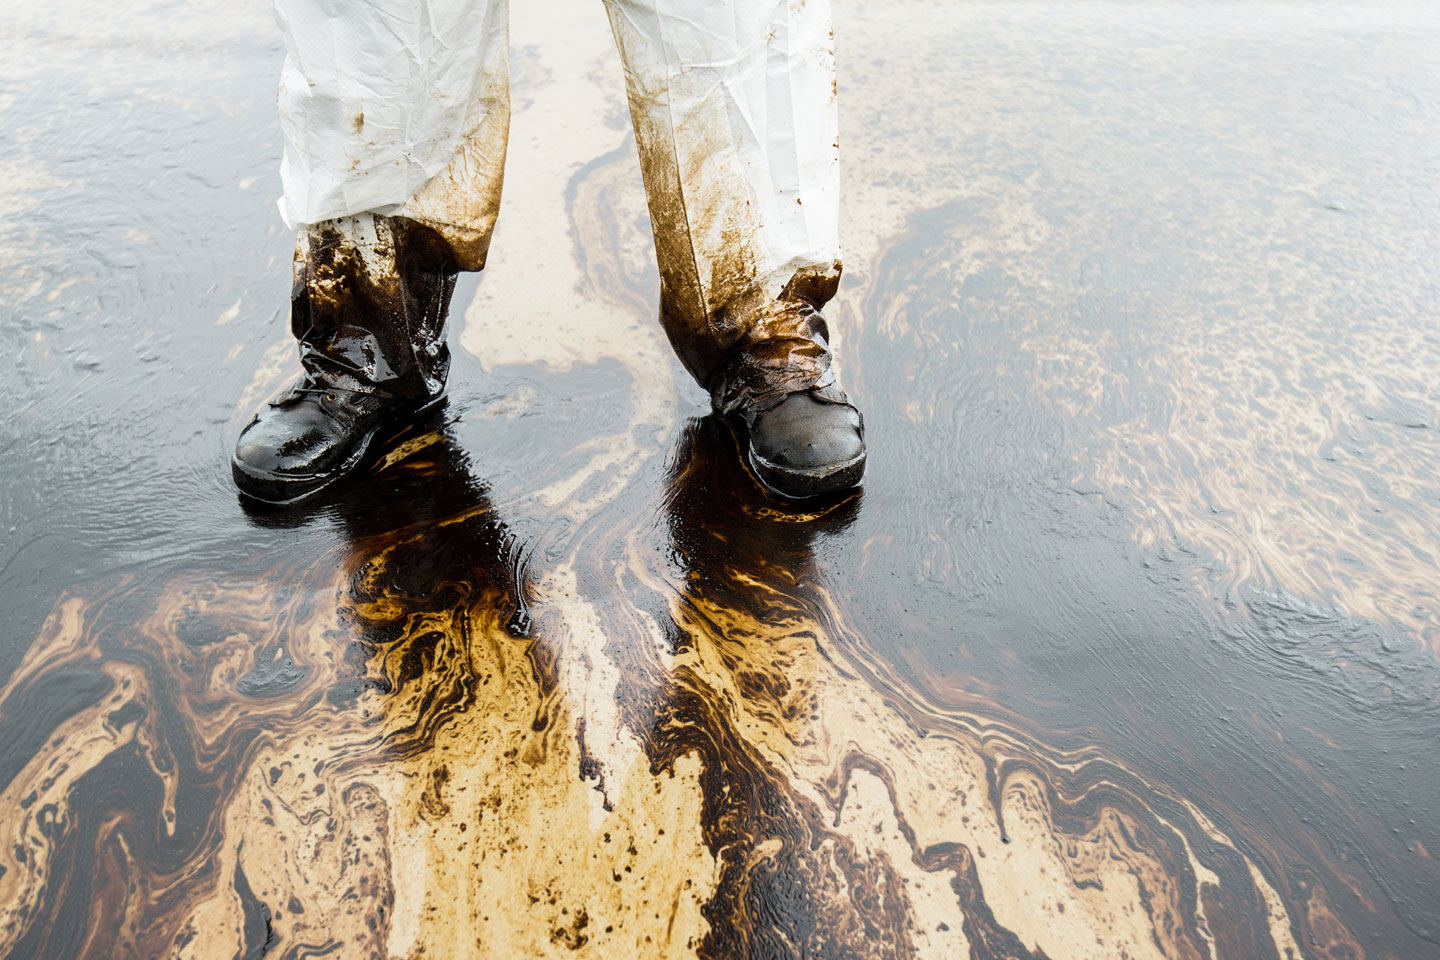 Russell-Cooke real estate disputes. Image of oil spill on land